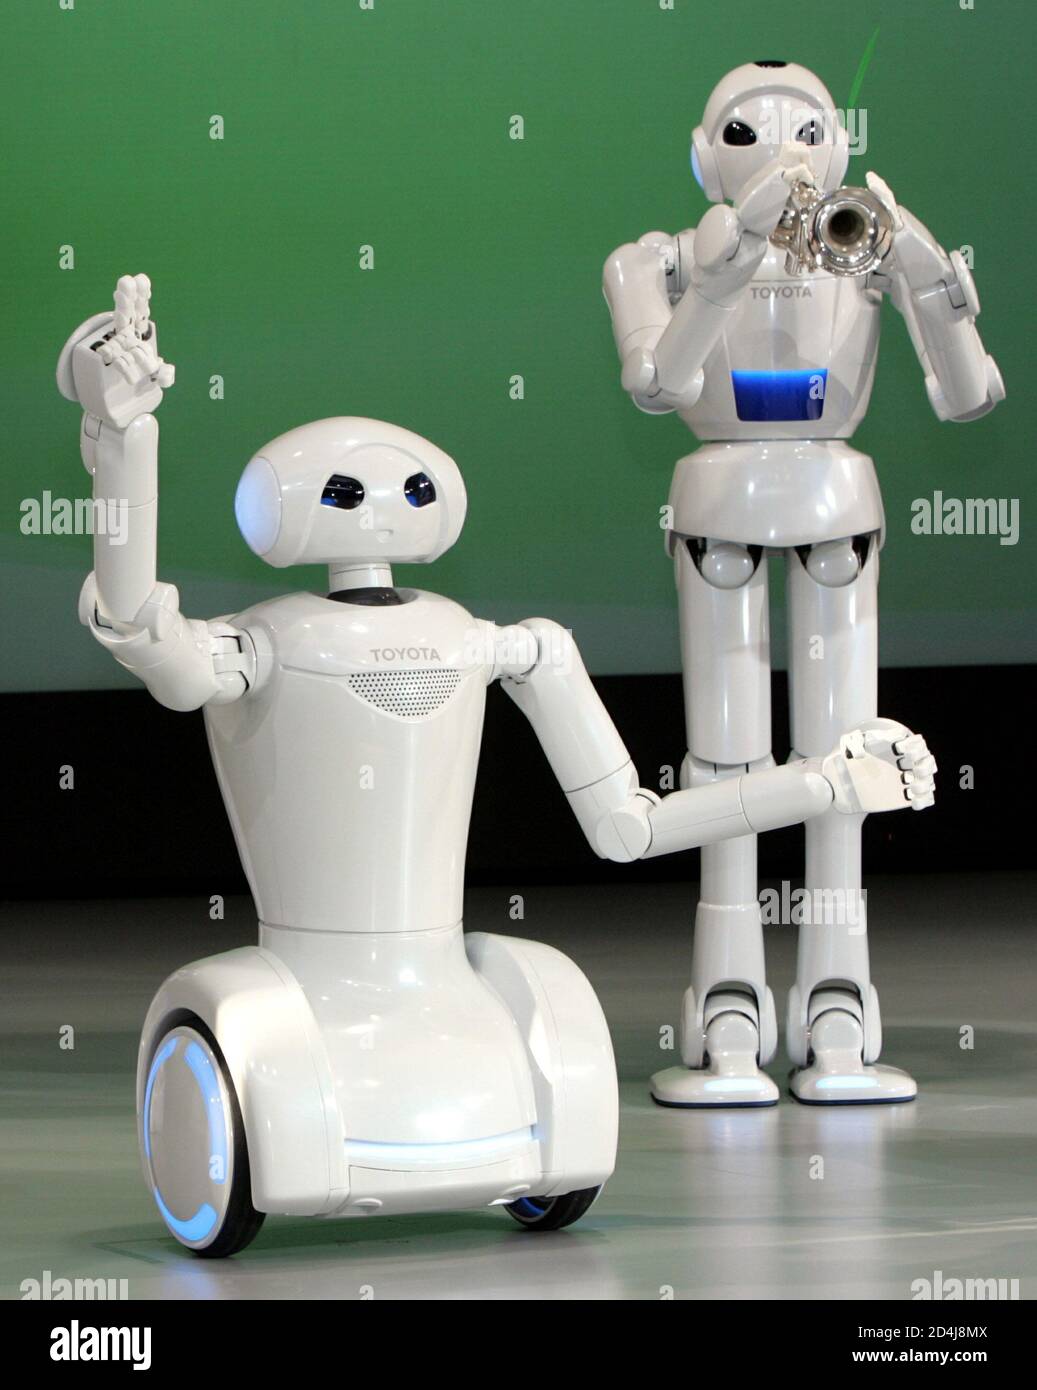 Toyota Motor Corp's new DJ (L) and music playing robot perform at the company's showroom in Tokyo December 3, 2004. The robots as part of a press preview for